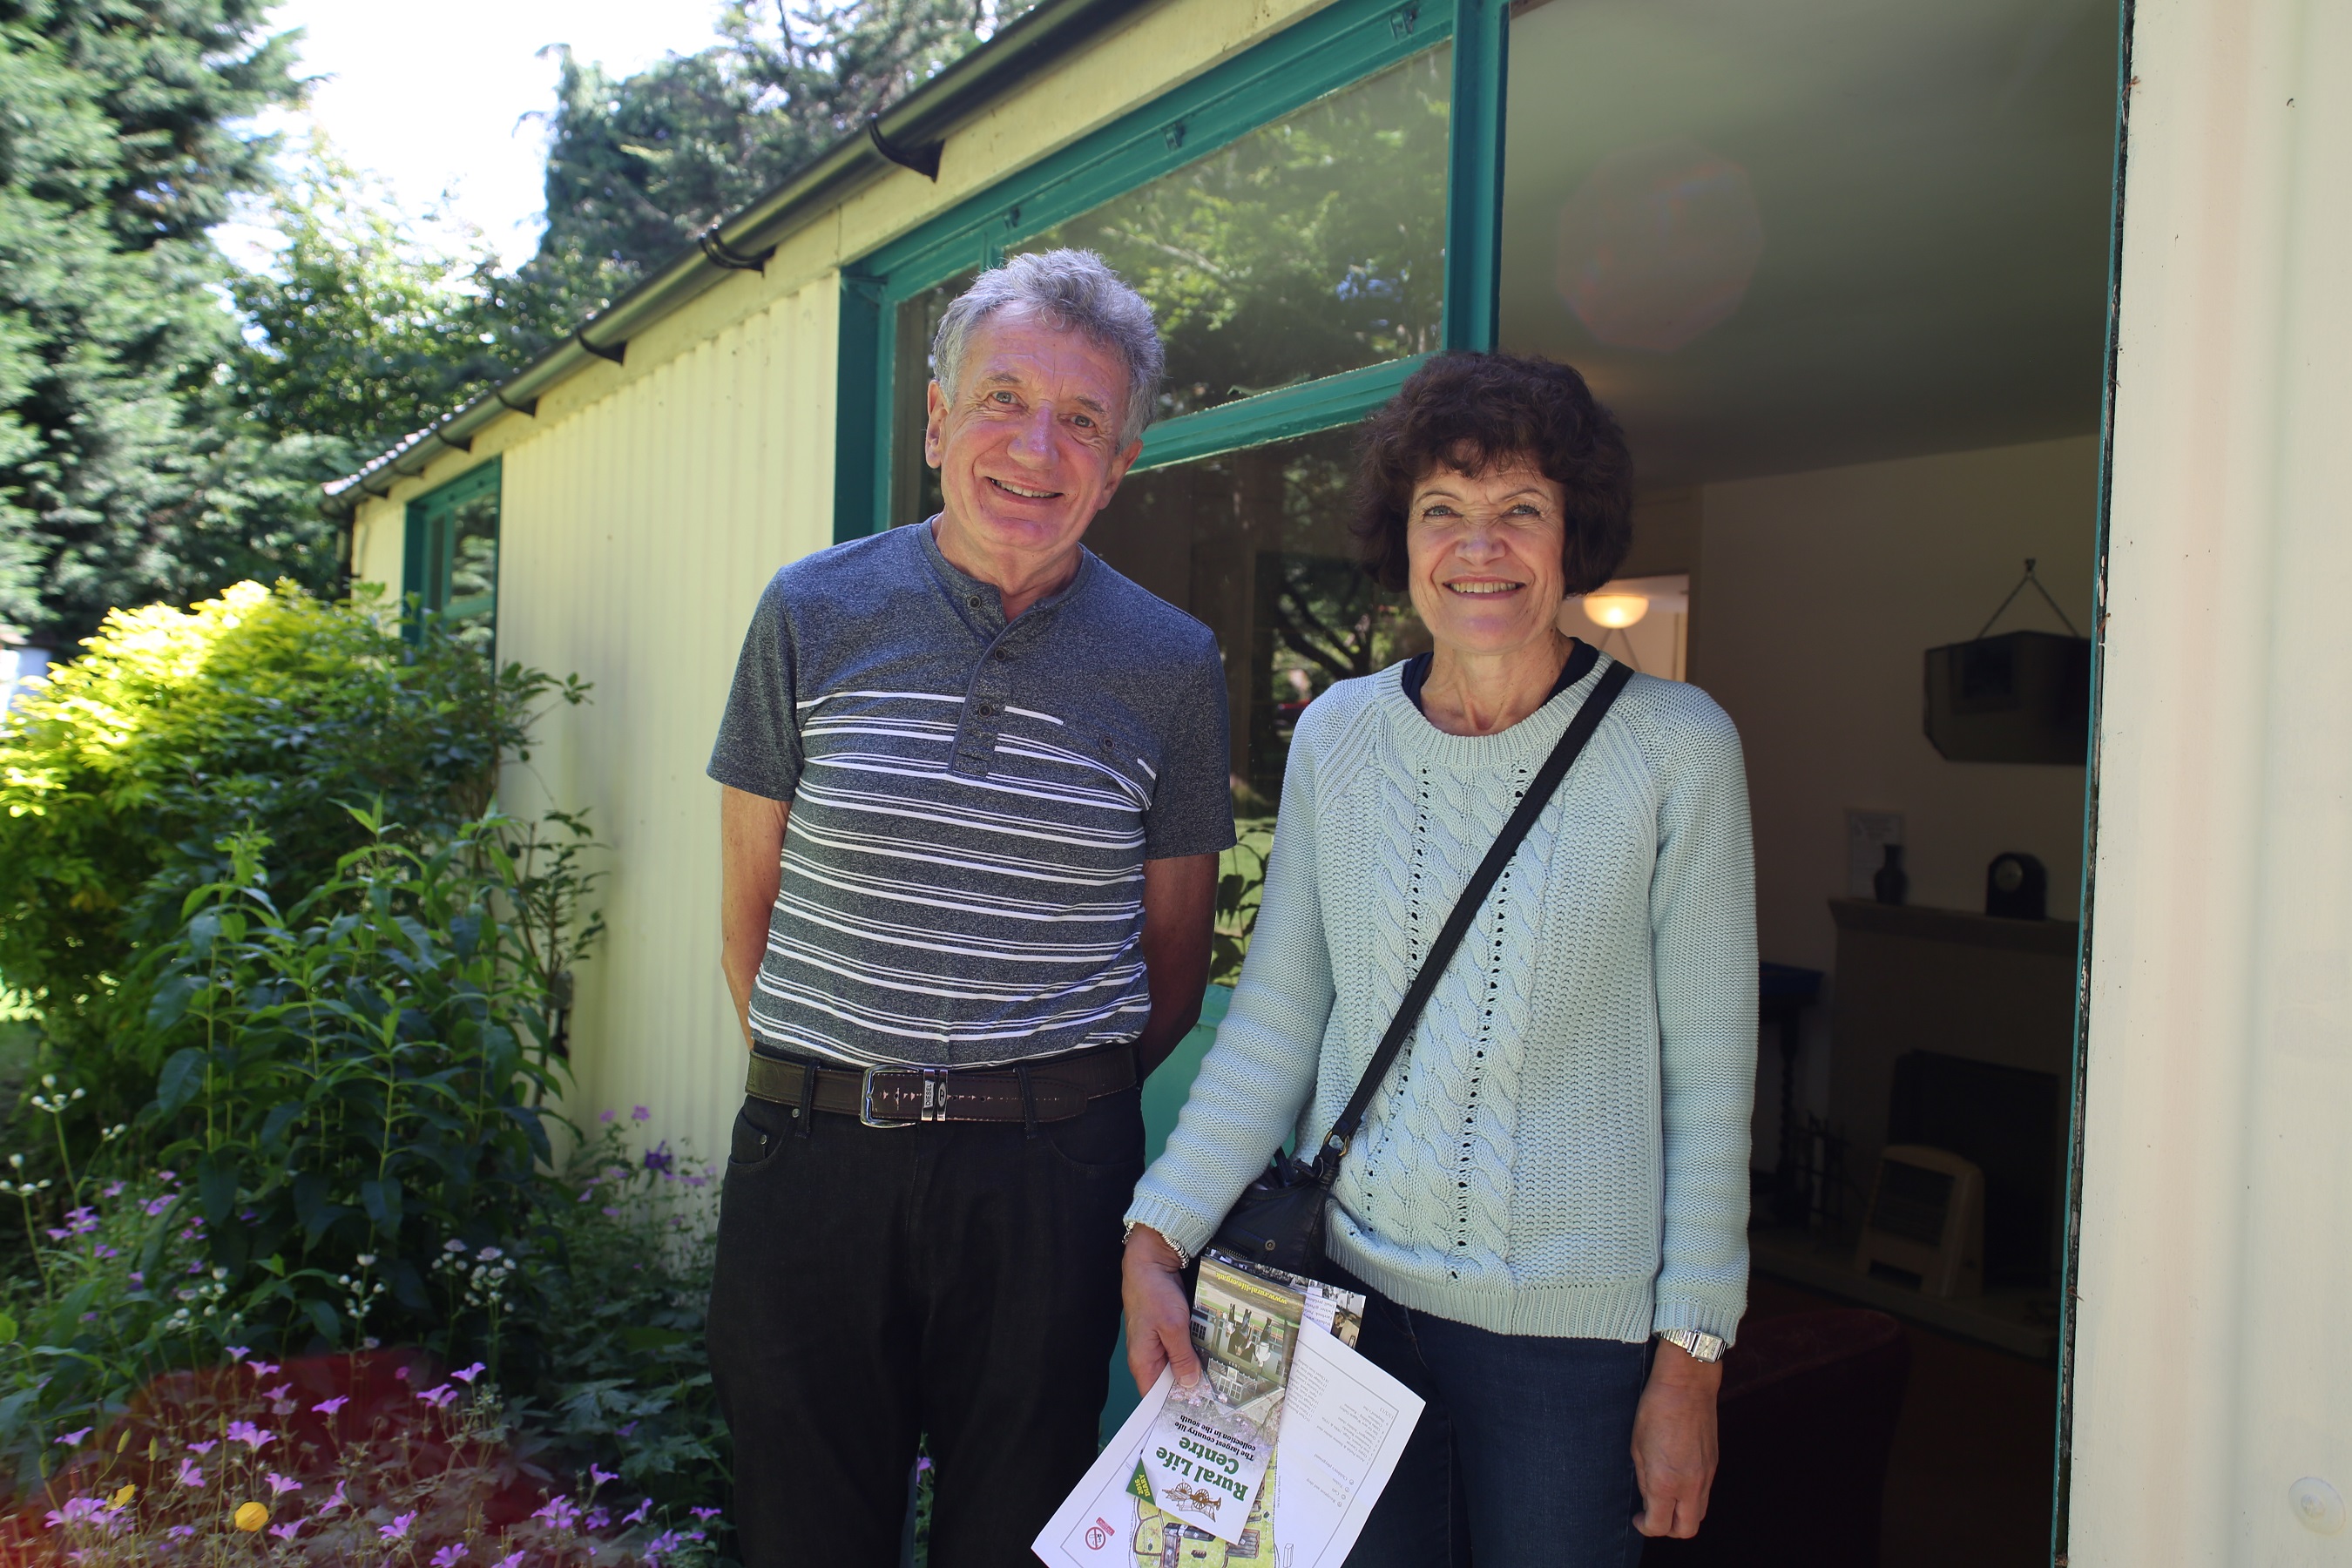 Audio recording of Allen and Judith Sawkins at the Rural Life Centre, July 2016